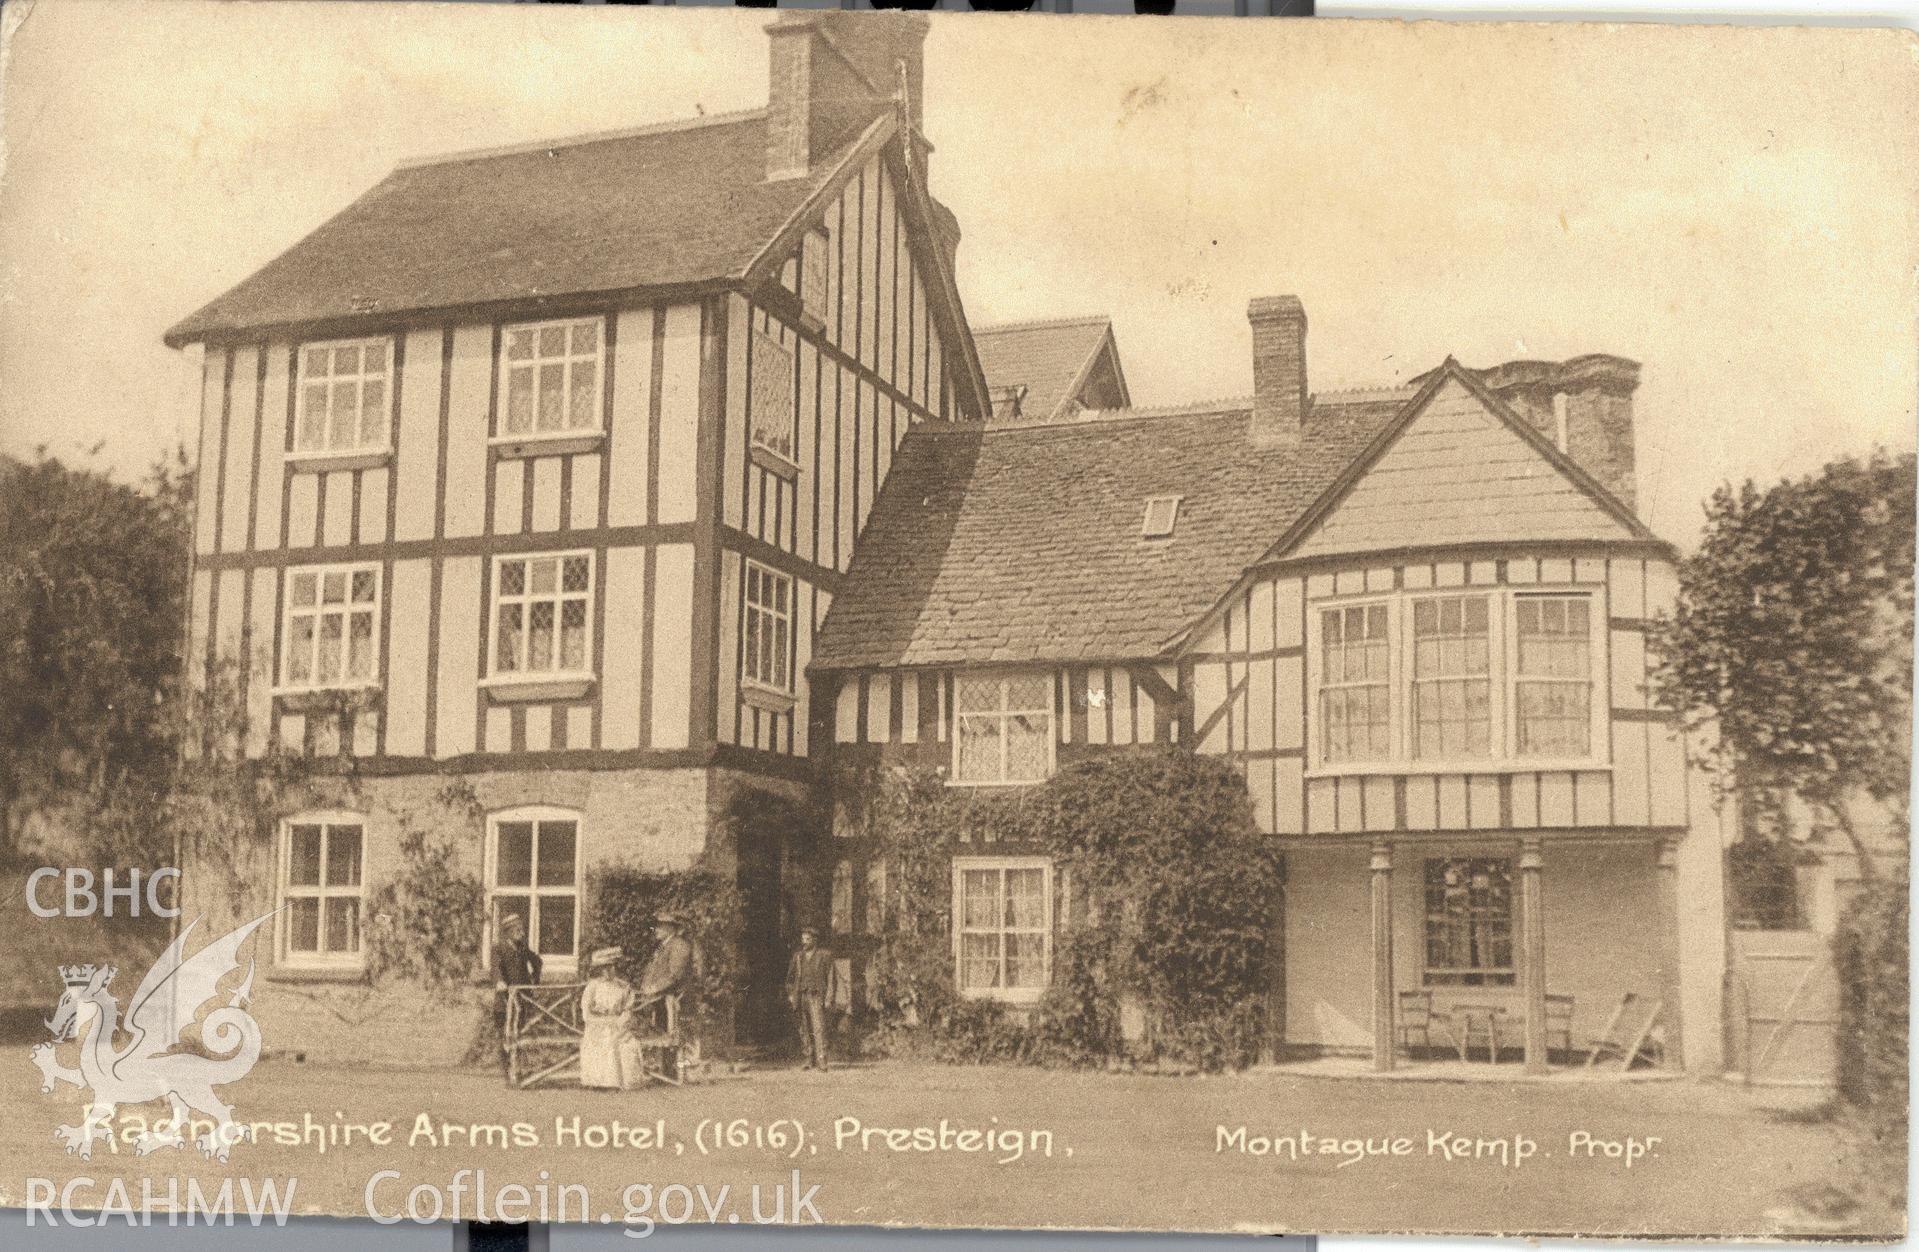 Digitised postcard image of Radnorshire Arms Hotel (1616) Presteigne. Montagu Kemp proprietor. Produced by Parks and Gardens Data Services, from an original item in the Peter Davis Collection at Parks and Gardens UK. We hold only web-resolution images of this collection, suitable for viewing on screen and for research purposes only. We do not hold the original images, or publication quality scans.